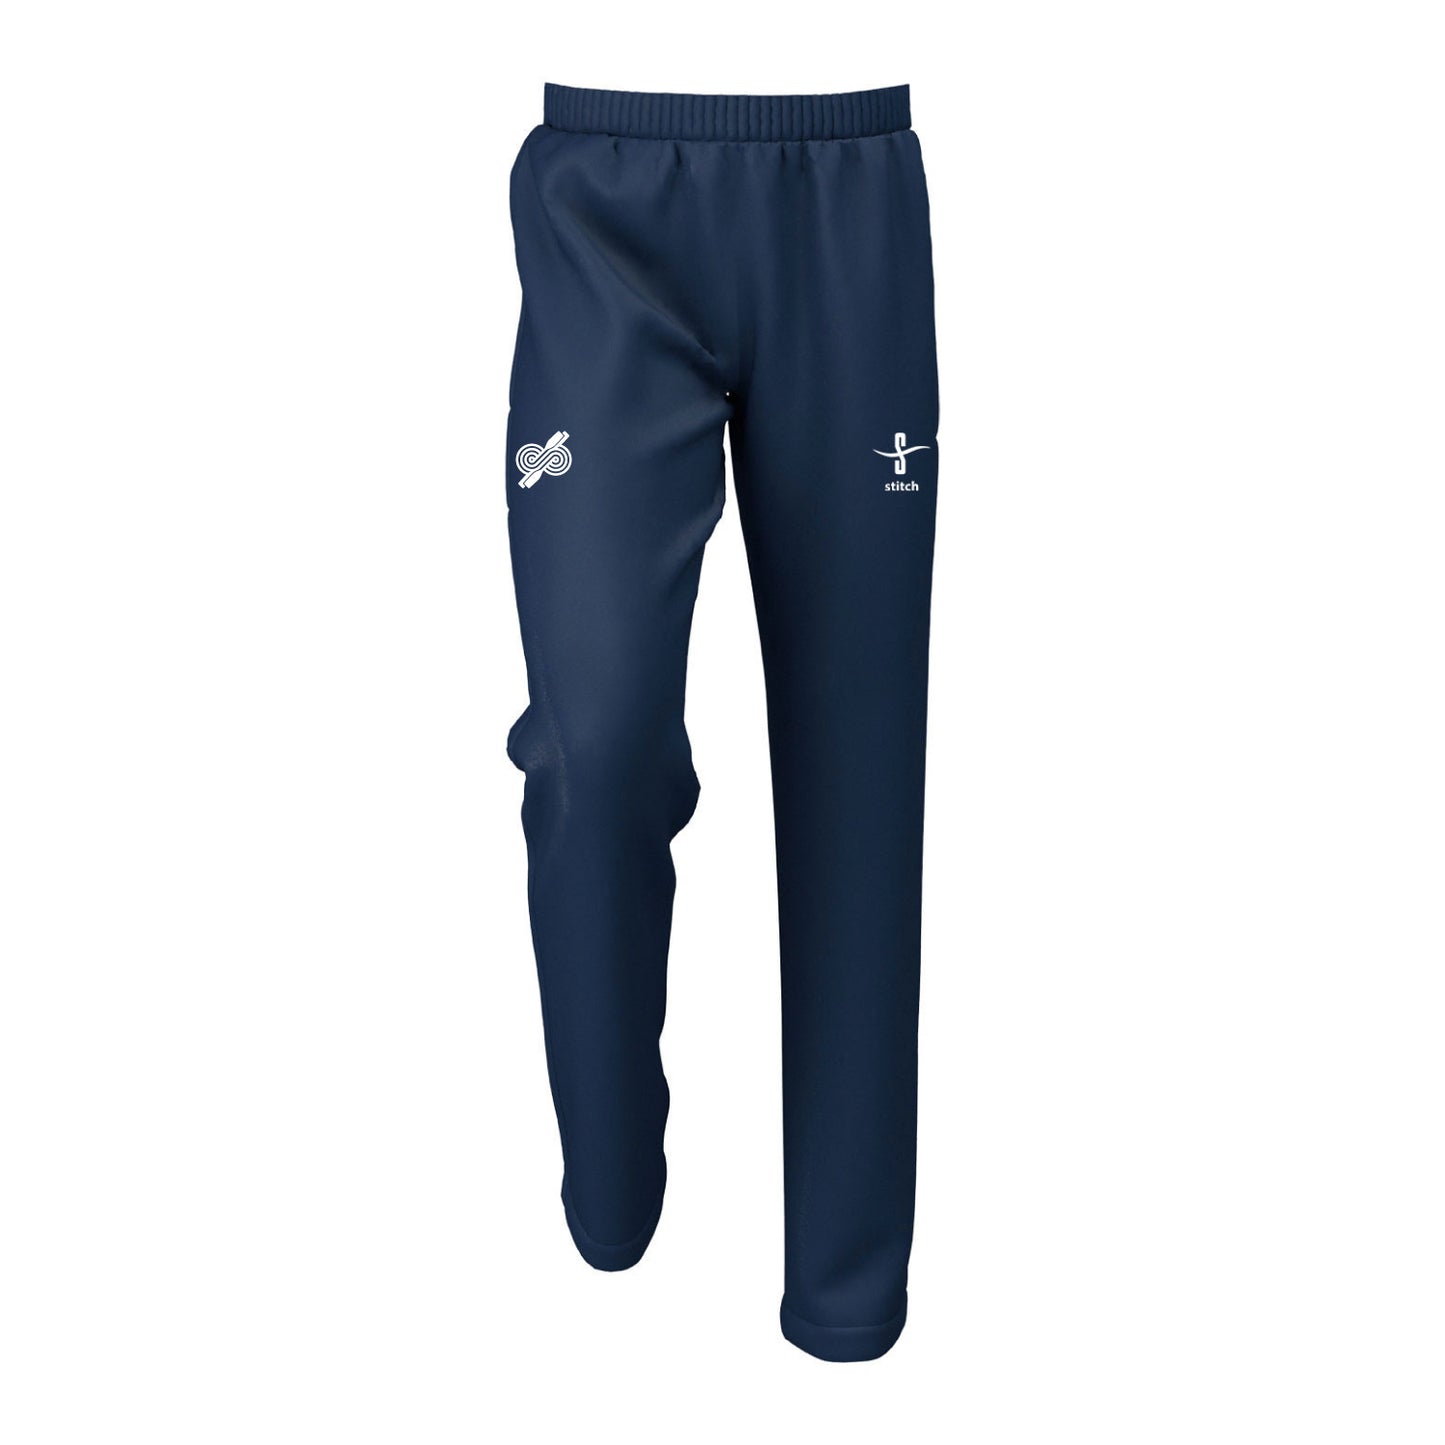 Just Row Gloucestershire Mens Cut Tracksuit Trousers